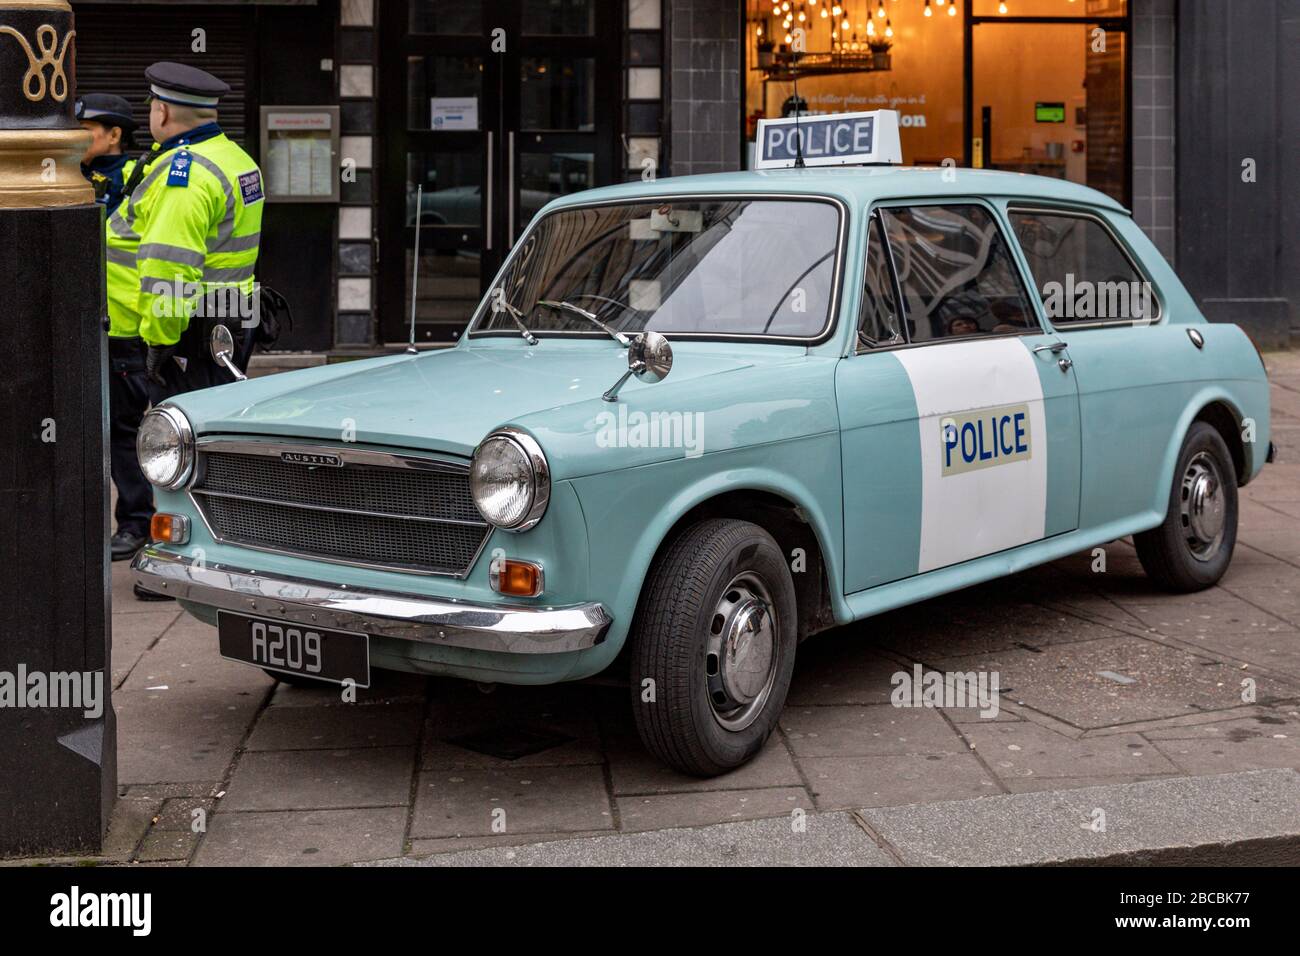 A policeman stands next to a vintage 1973 Austin 1100 MKII police car, London, England Stock Photo